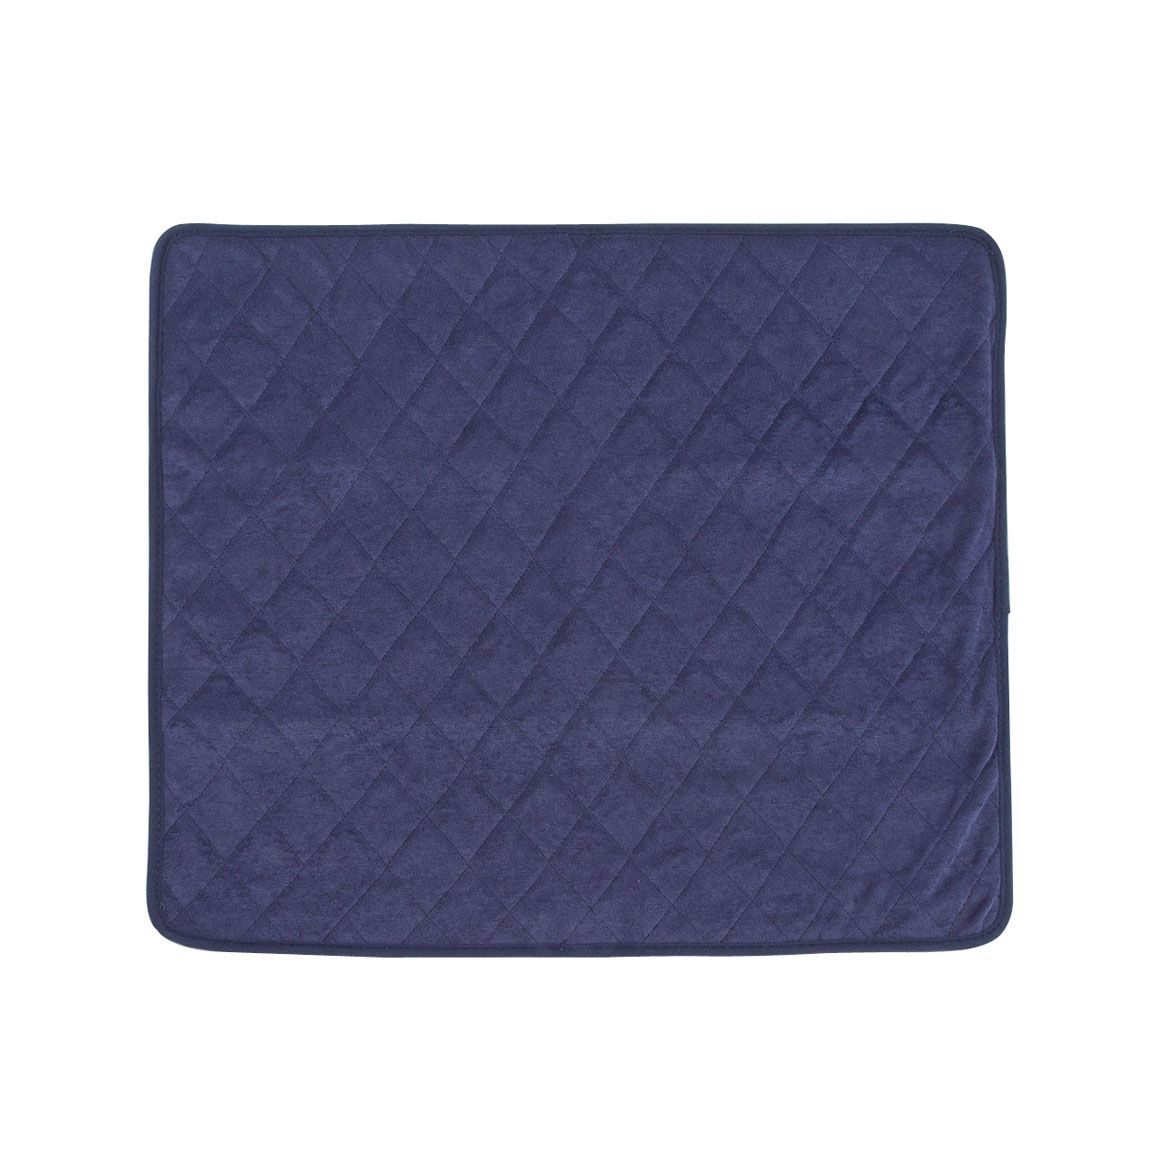 Waterproof Seat Protector, Quilted + '-' + 359872